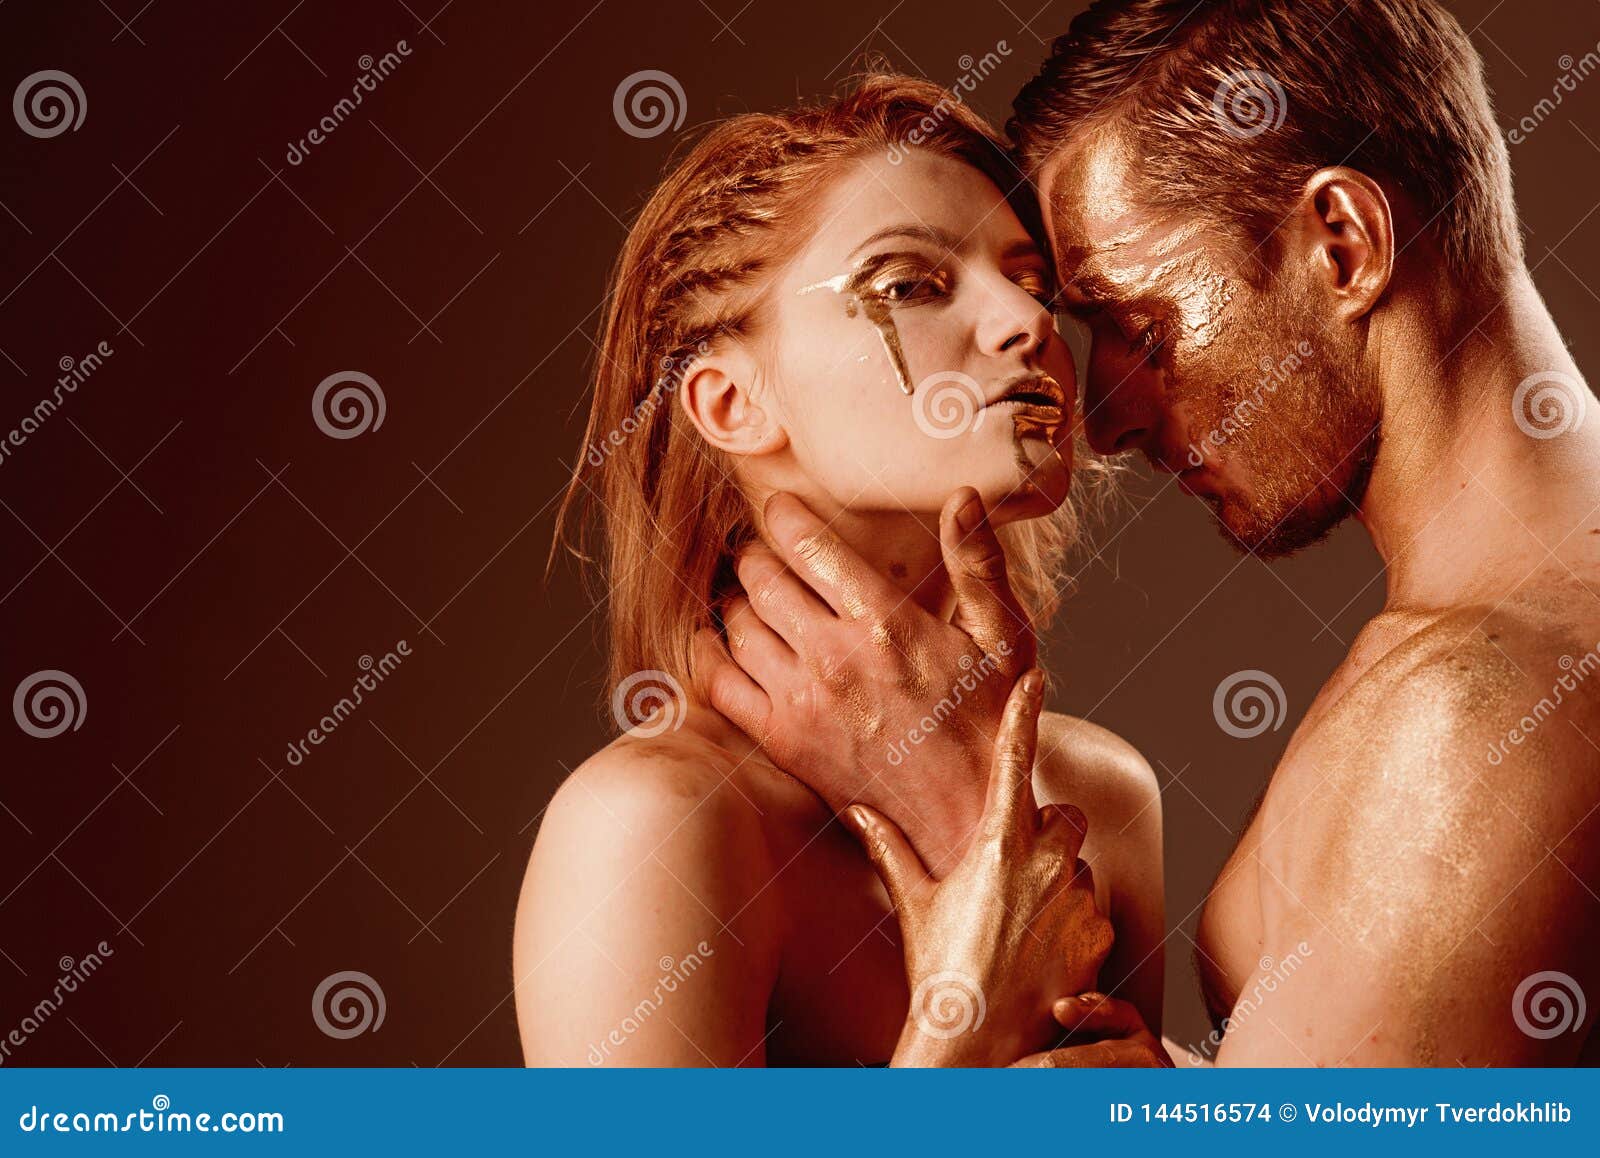 erotica concept. erotica with couple having golden body and touching each other, copy space.